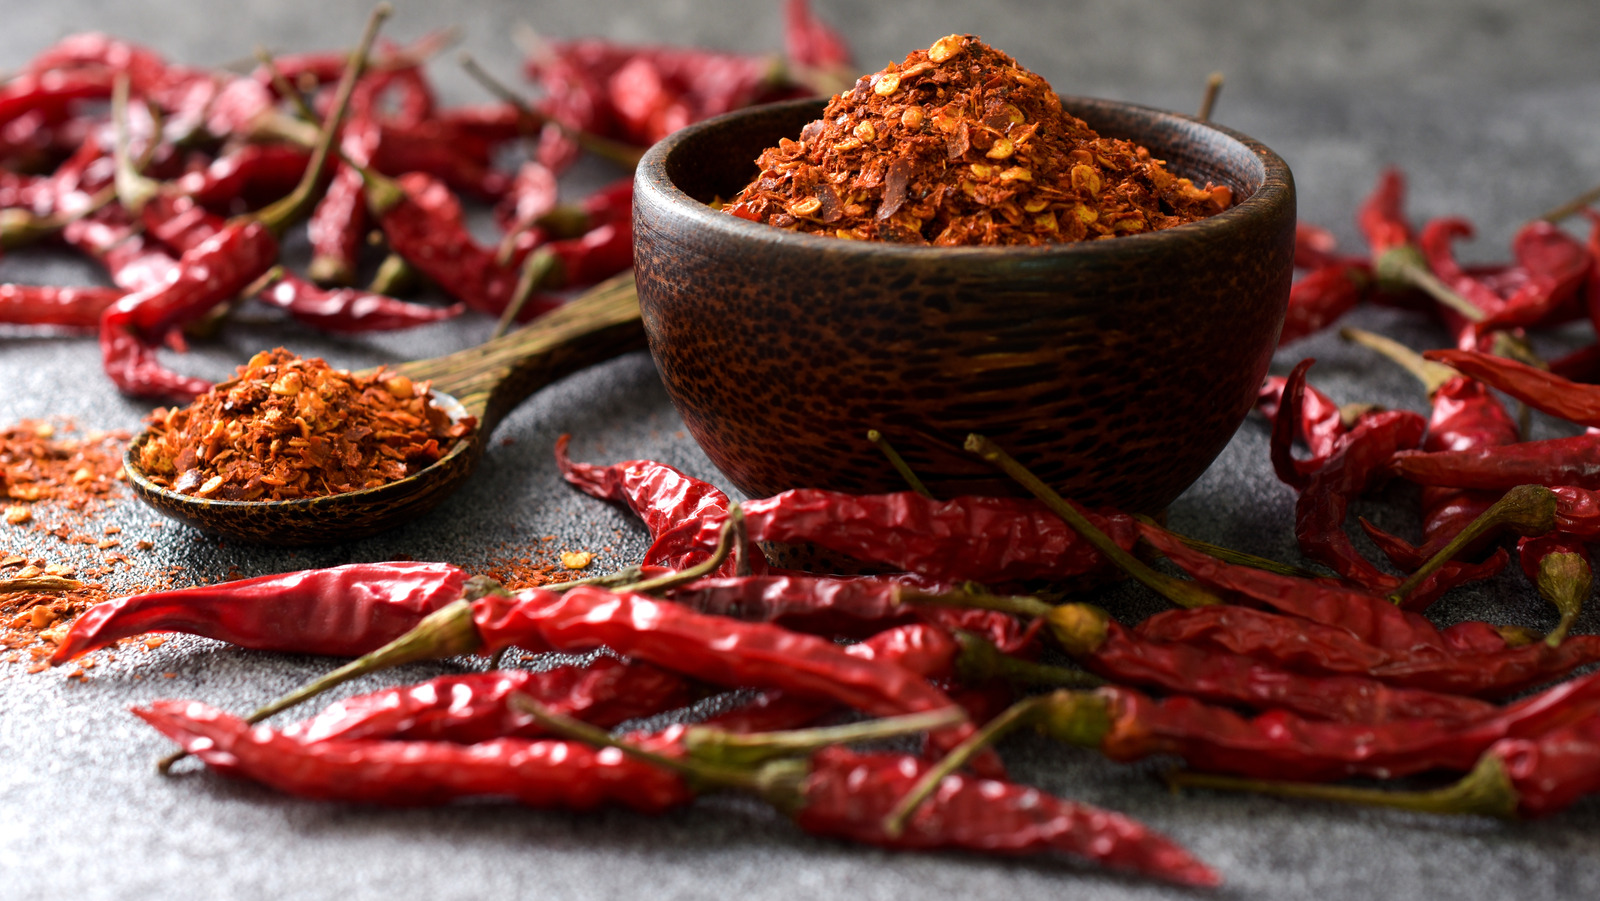 What Are Dried Chili Peppers And How Hot Are They?